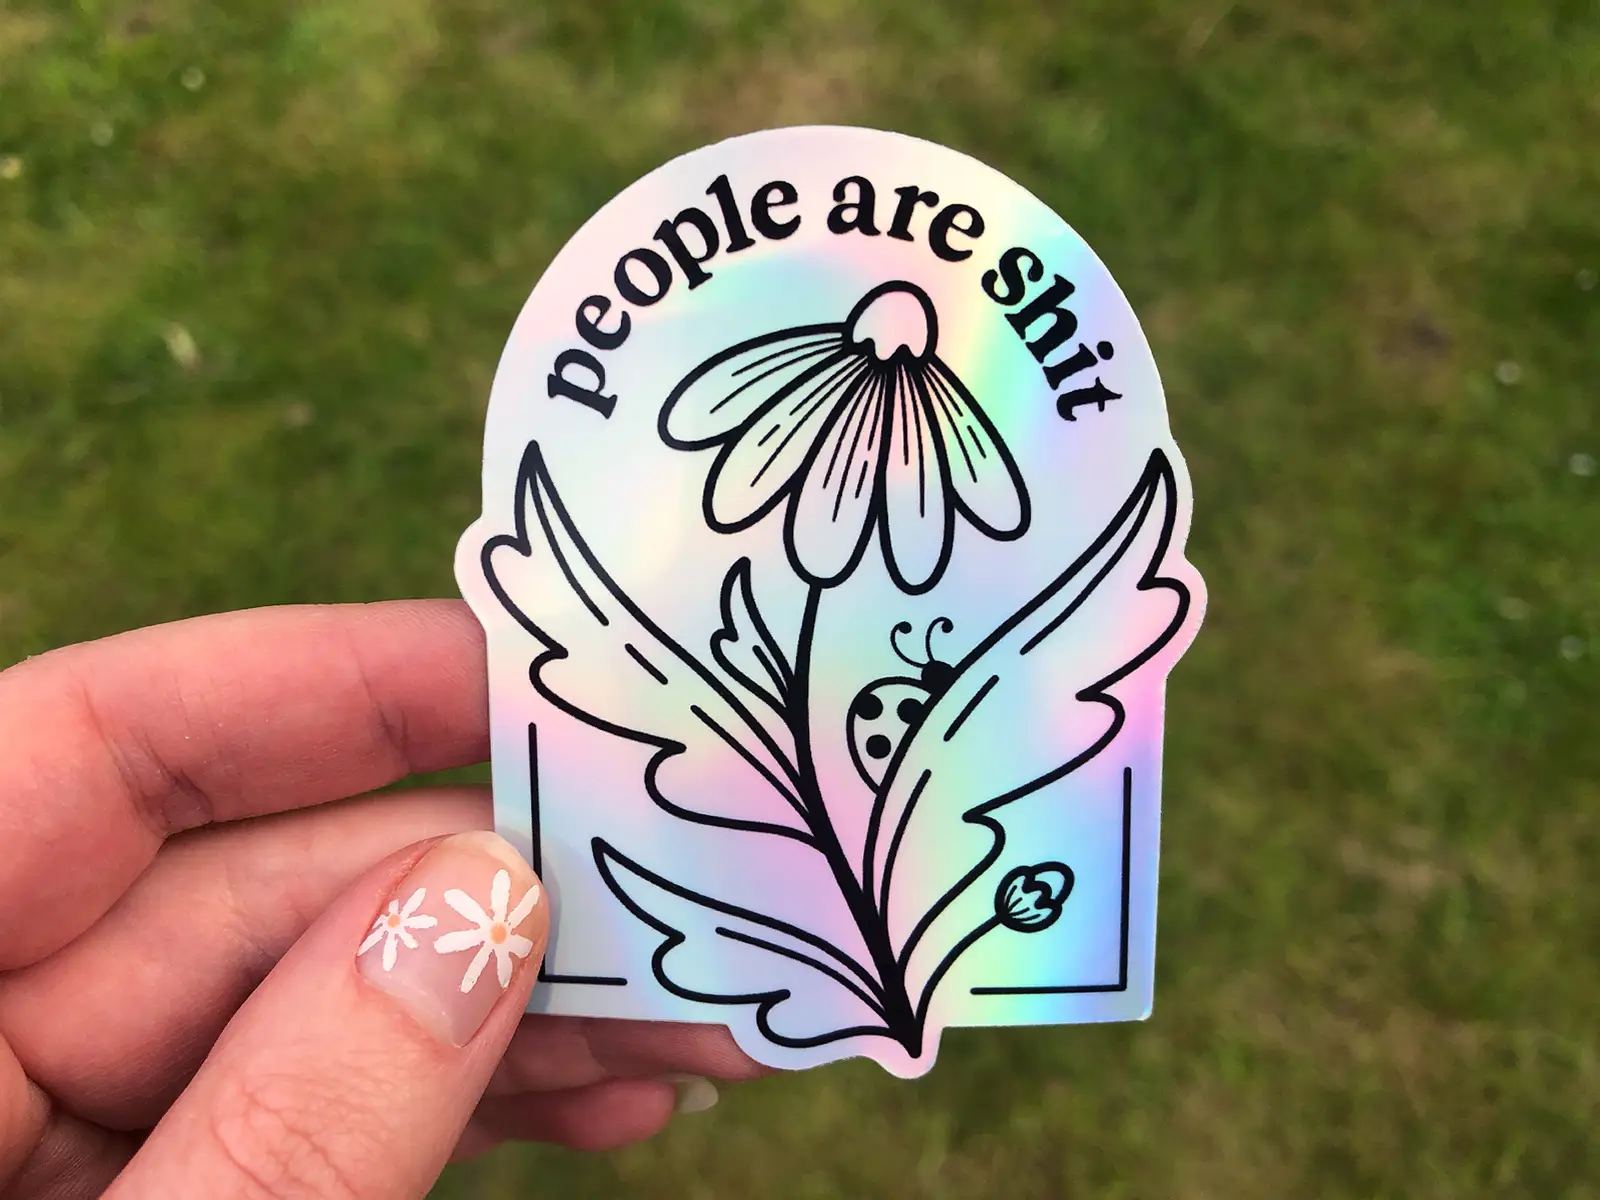 People are shit holographic sticker with a floral design